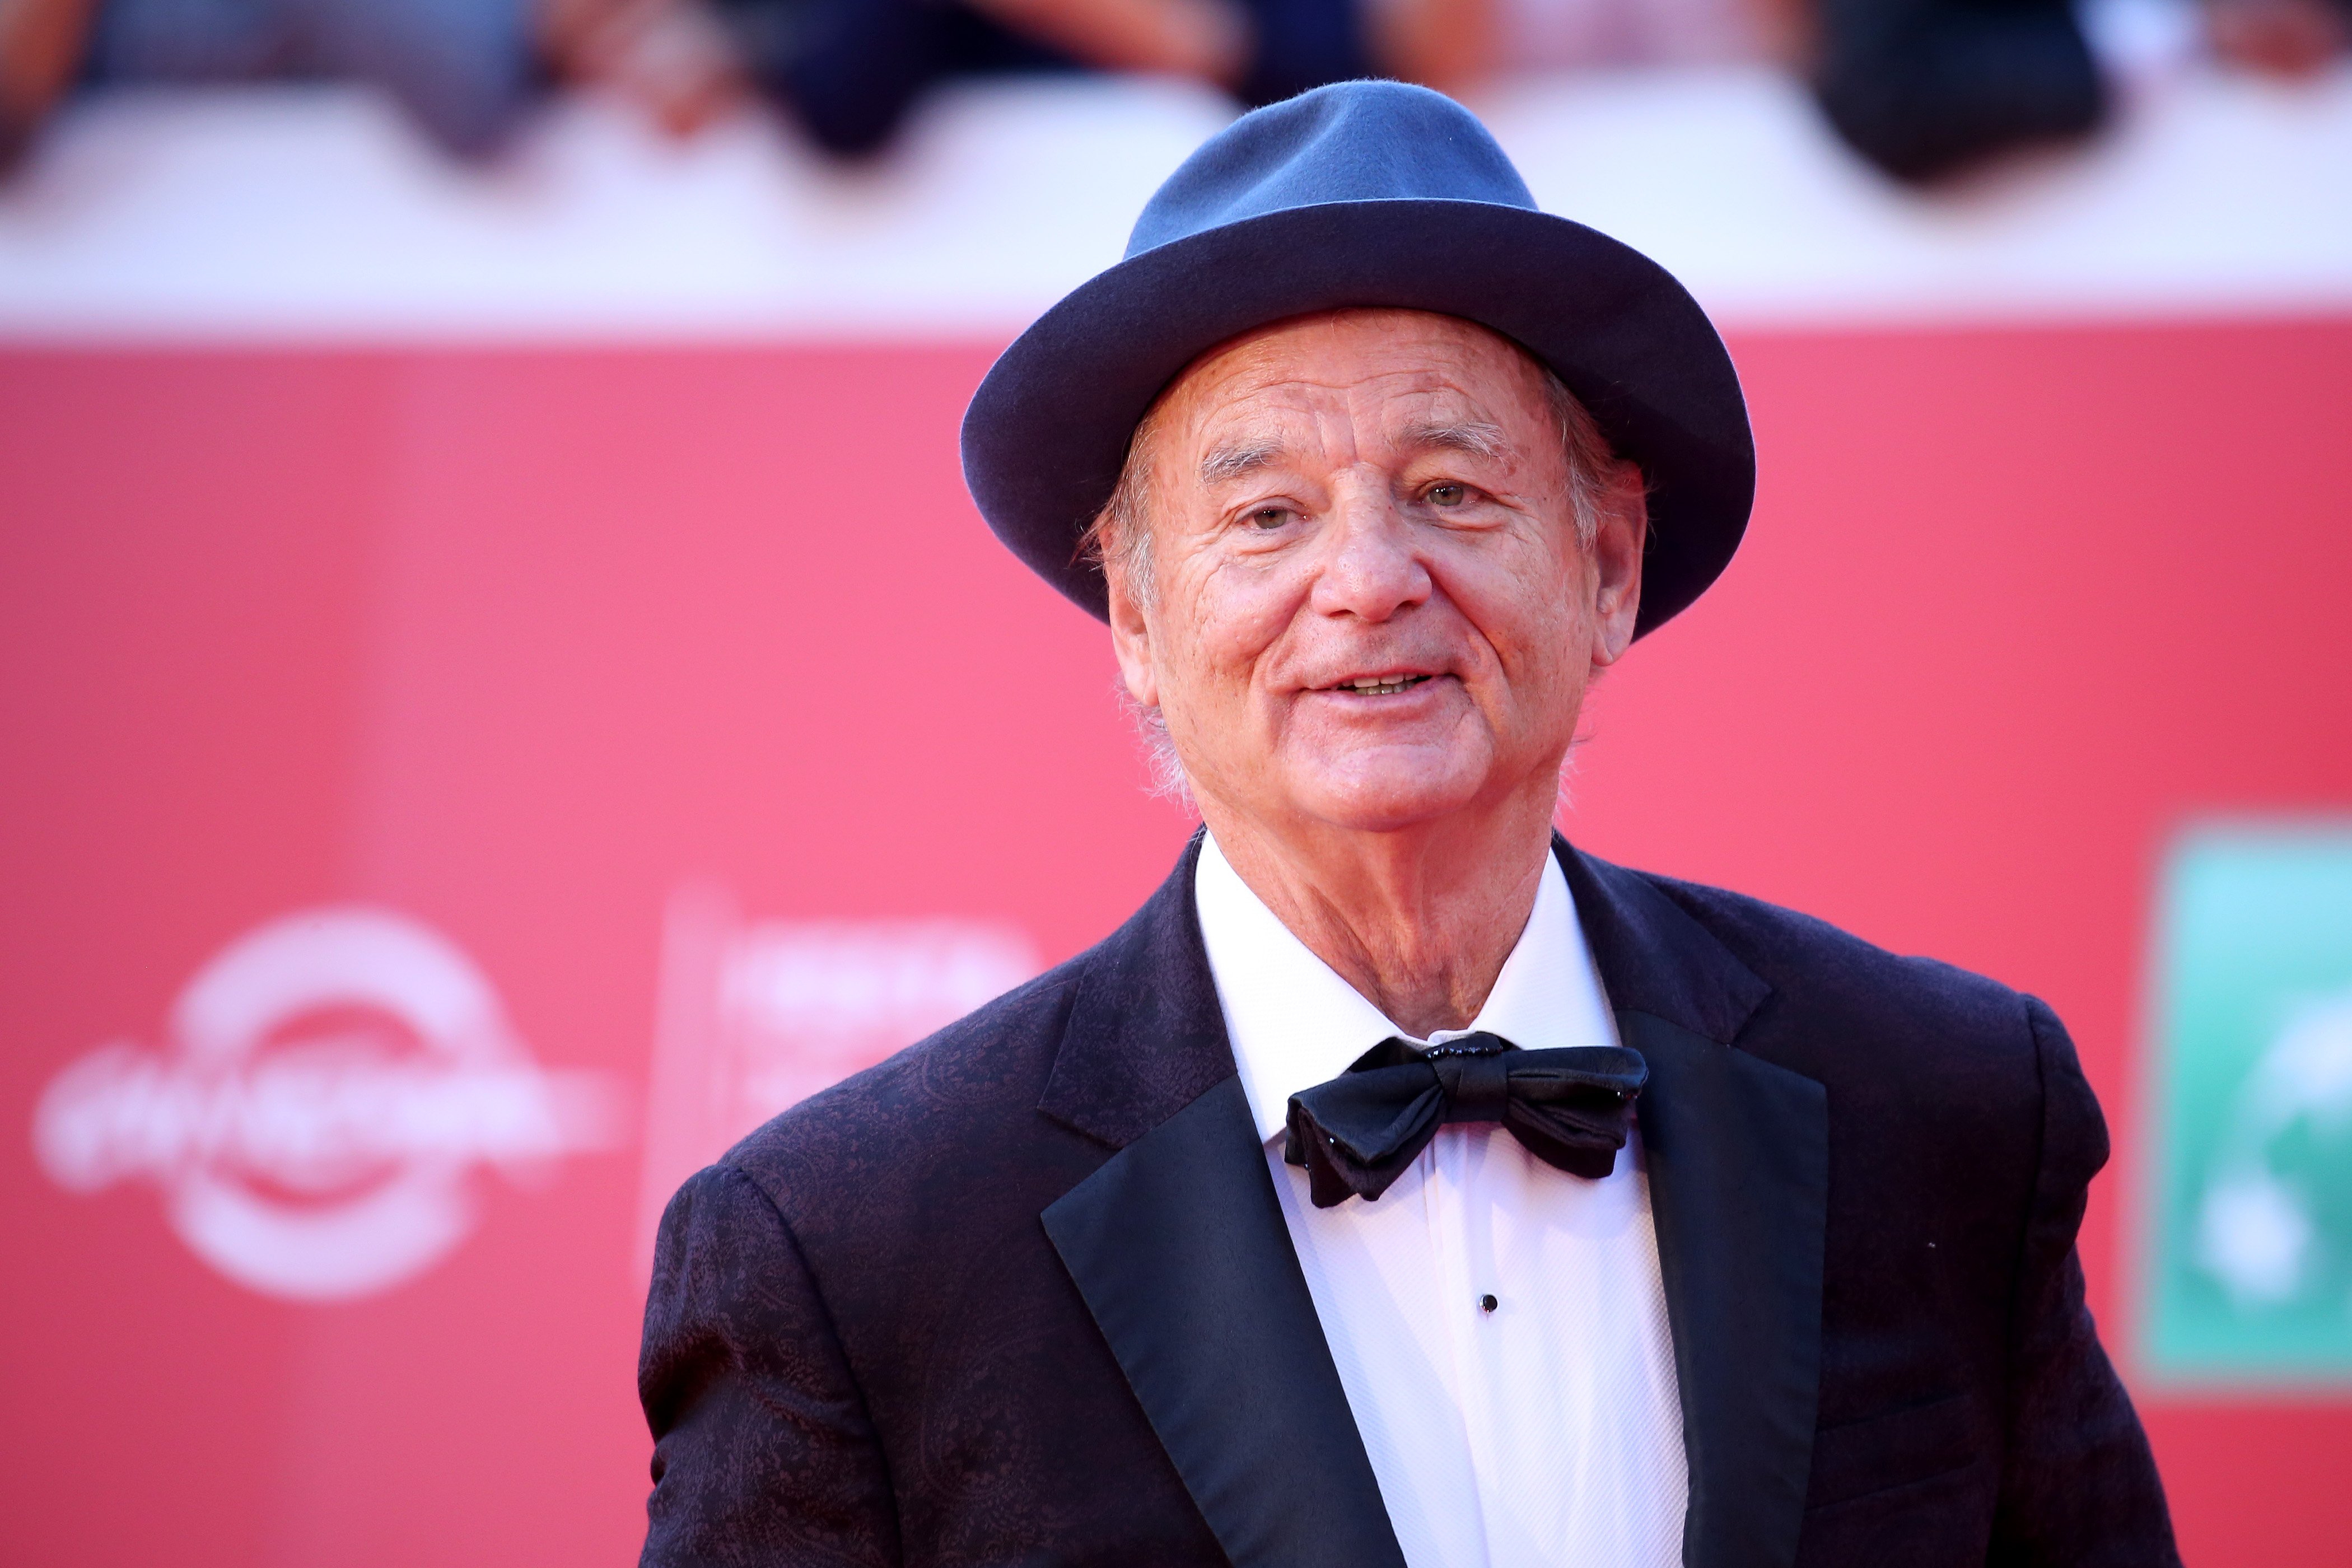 Bill Murray walks a red carpet during the 14th Rome Film Festival on October 19, 2019 in Rome, Italy.